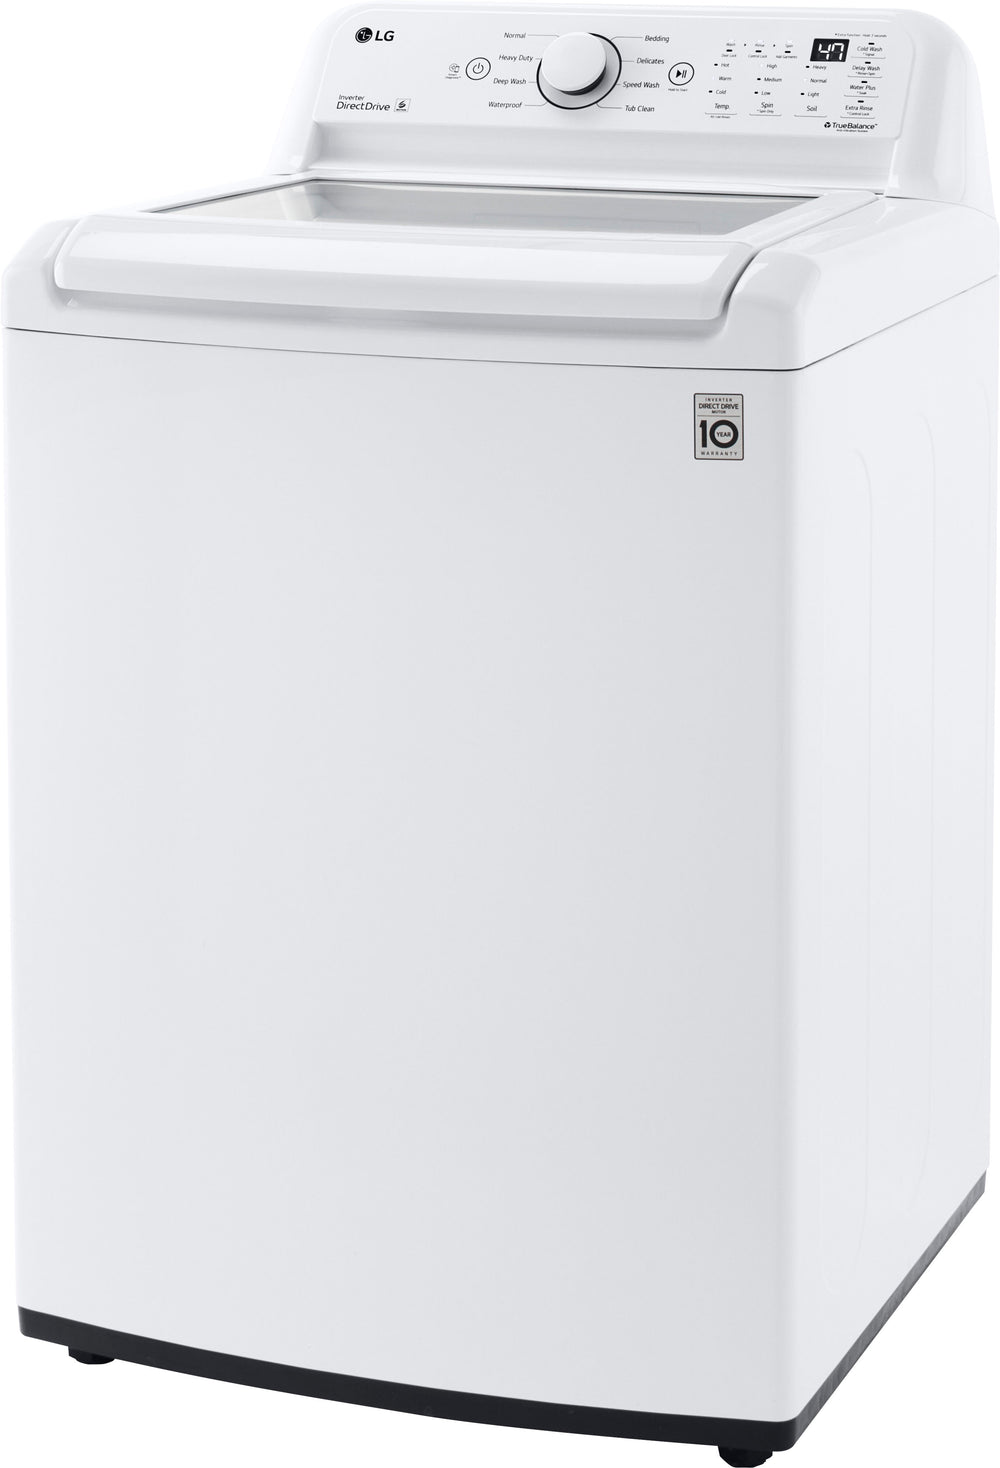 LG - 4.5 Cu. Ft. Smart Top Load Washer with Vibration Reduction and TurboDrum Technology - White_1